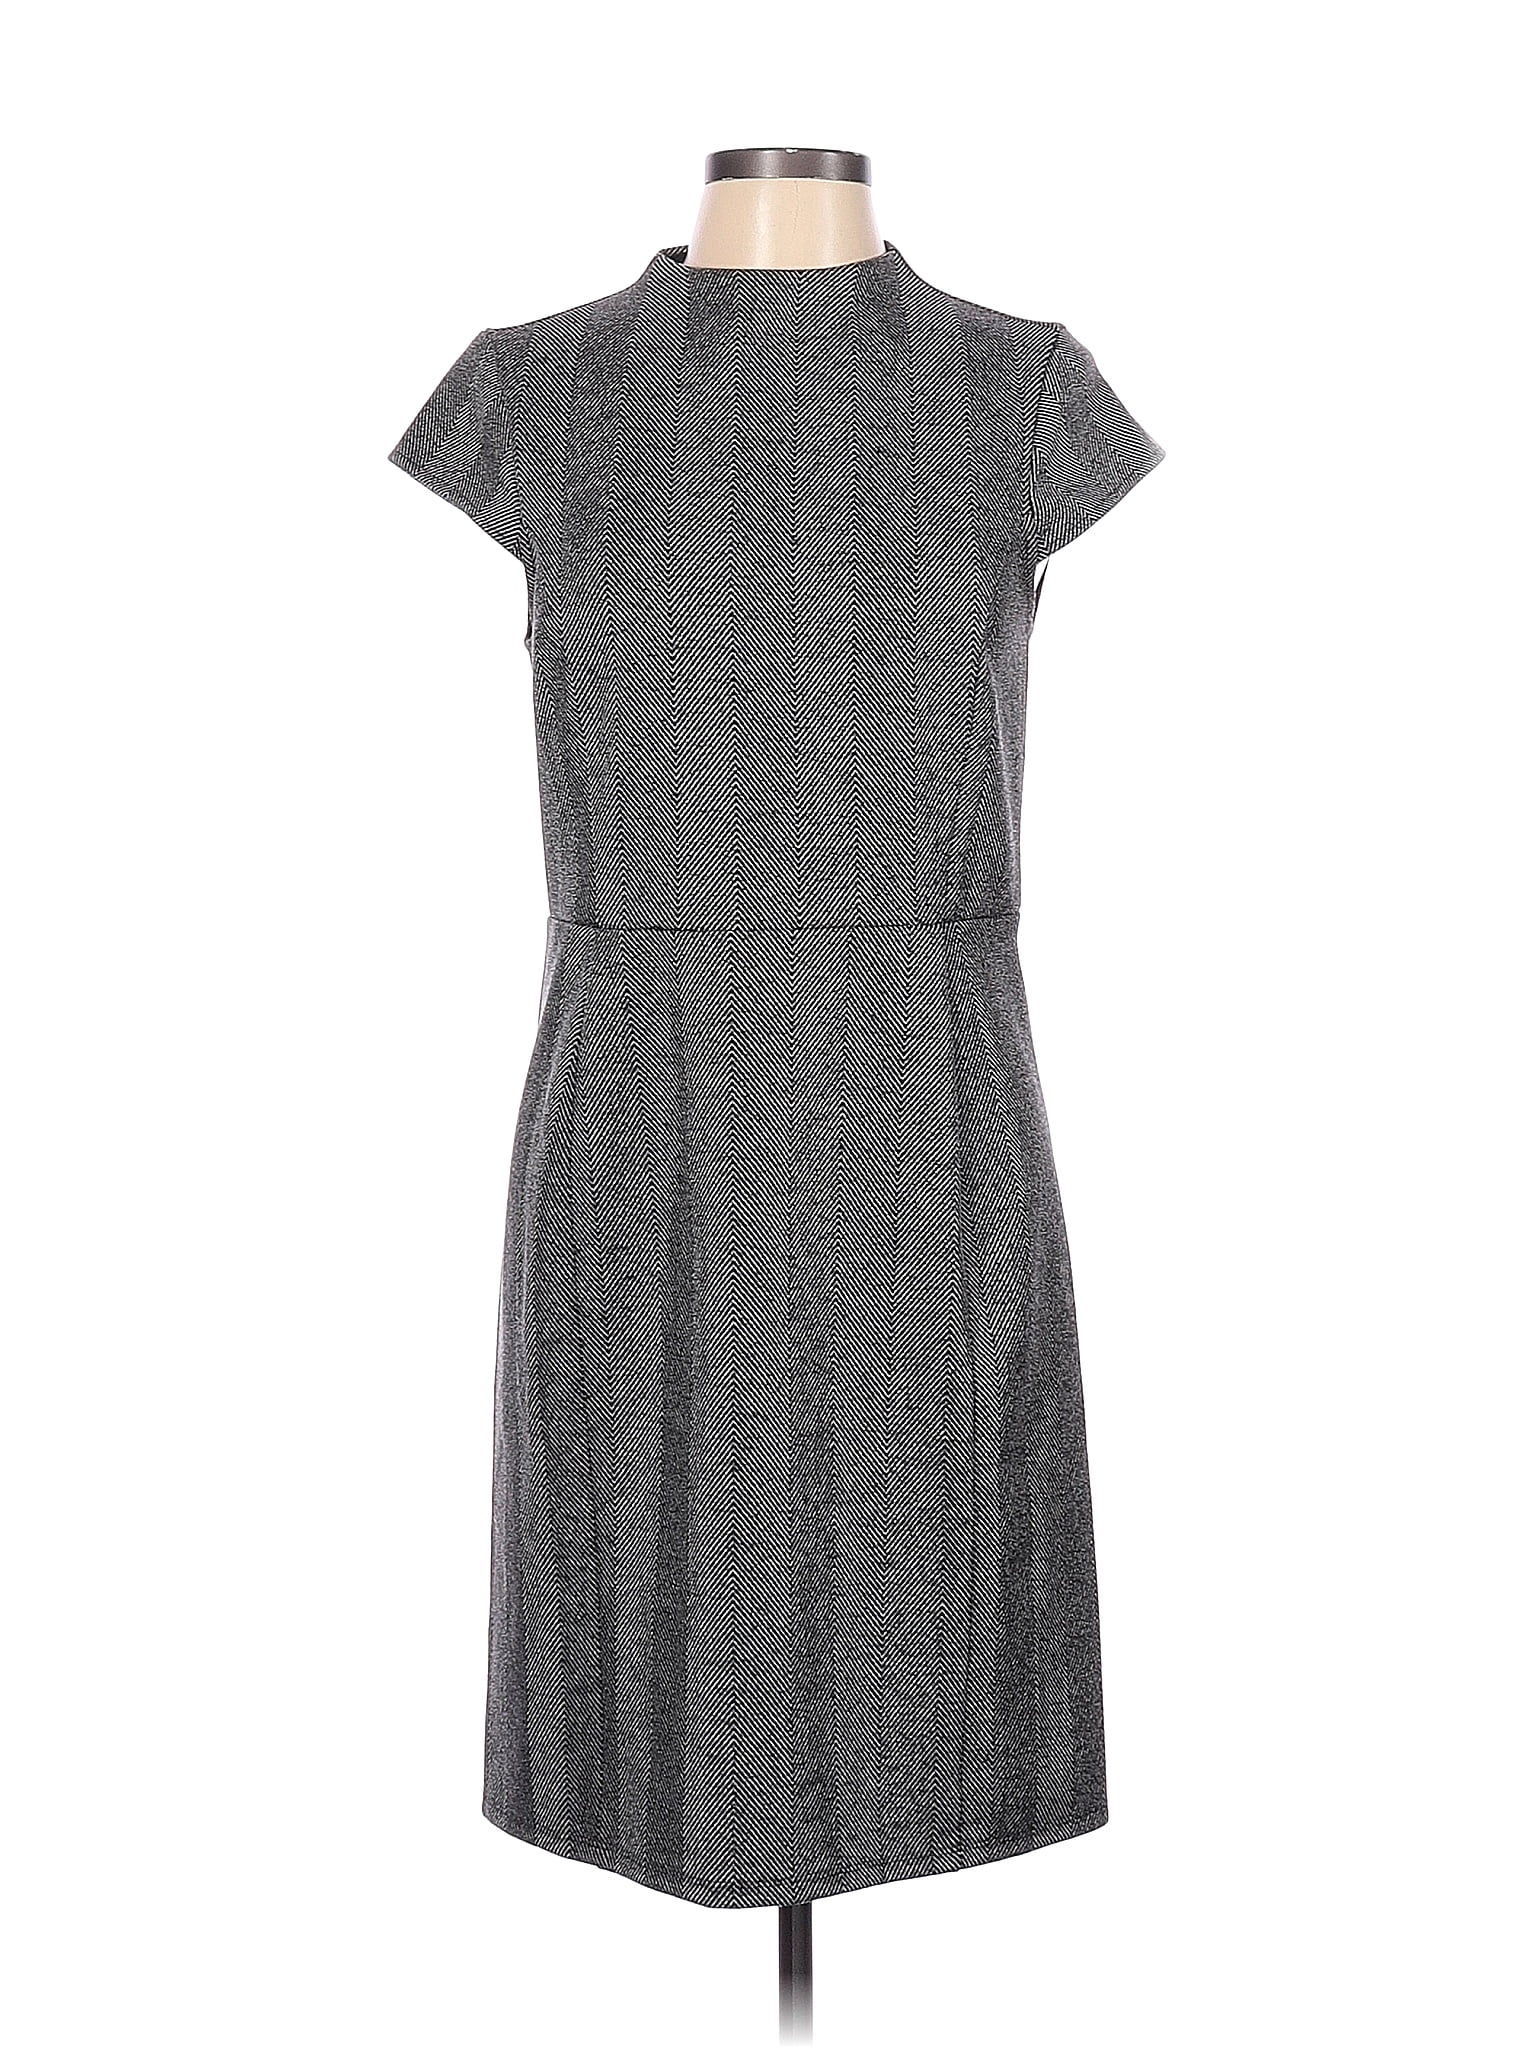 H&M Solid Gray Casual Dress Size L - 53% off | thredUP